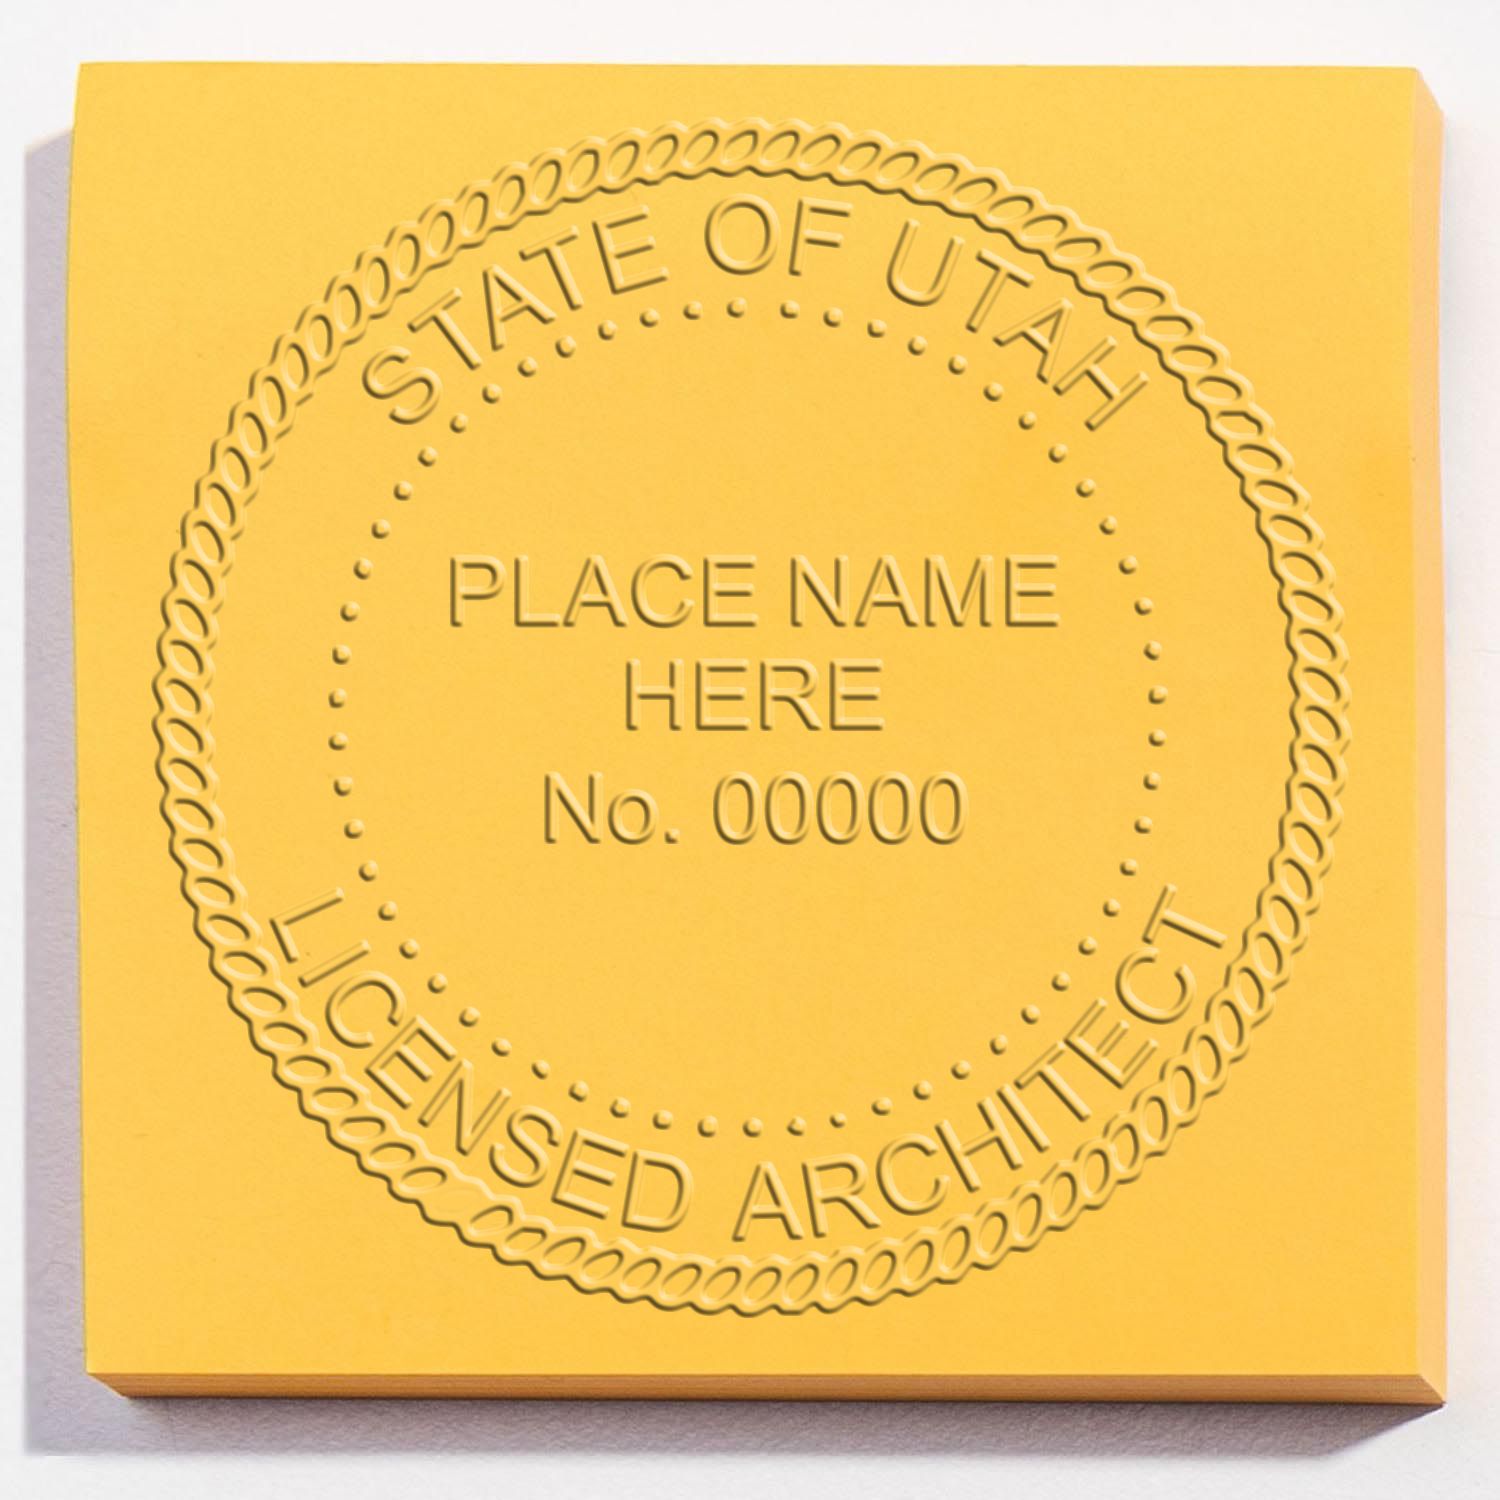 The State of Utah Architectural Seal Embosser stamp impression comes to life with a crisp, detailed photo on paper - showcasing true professional quality.